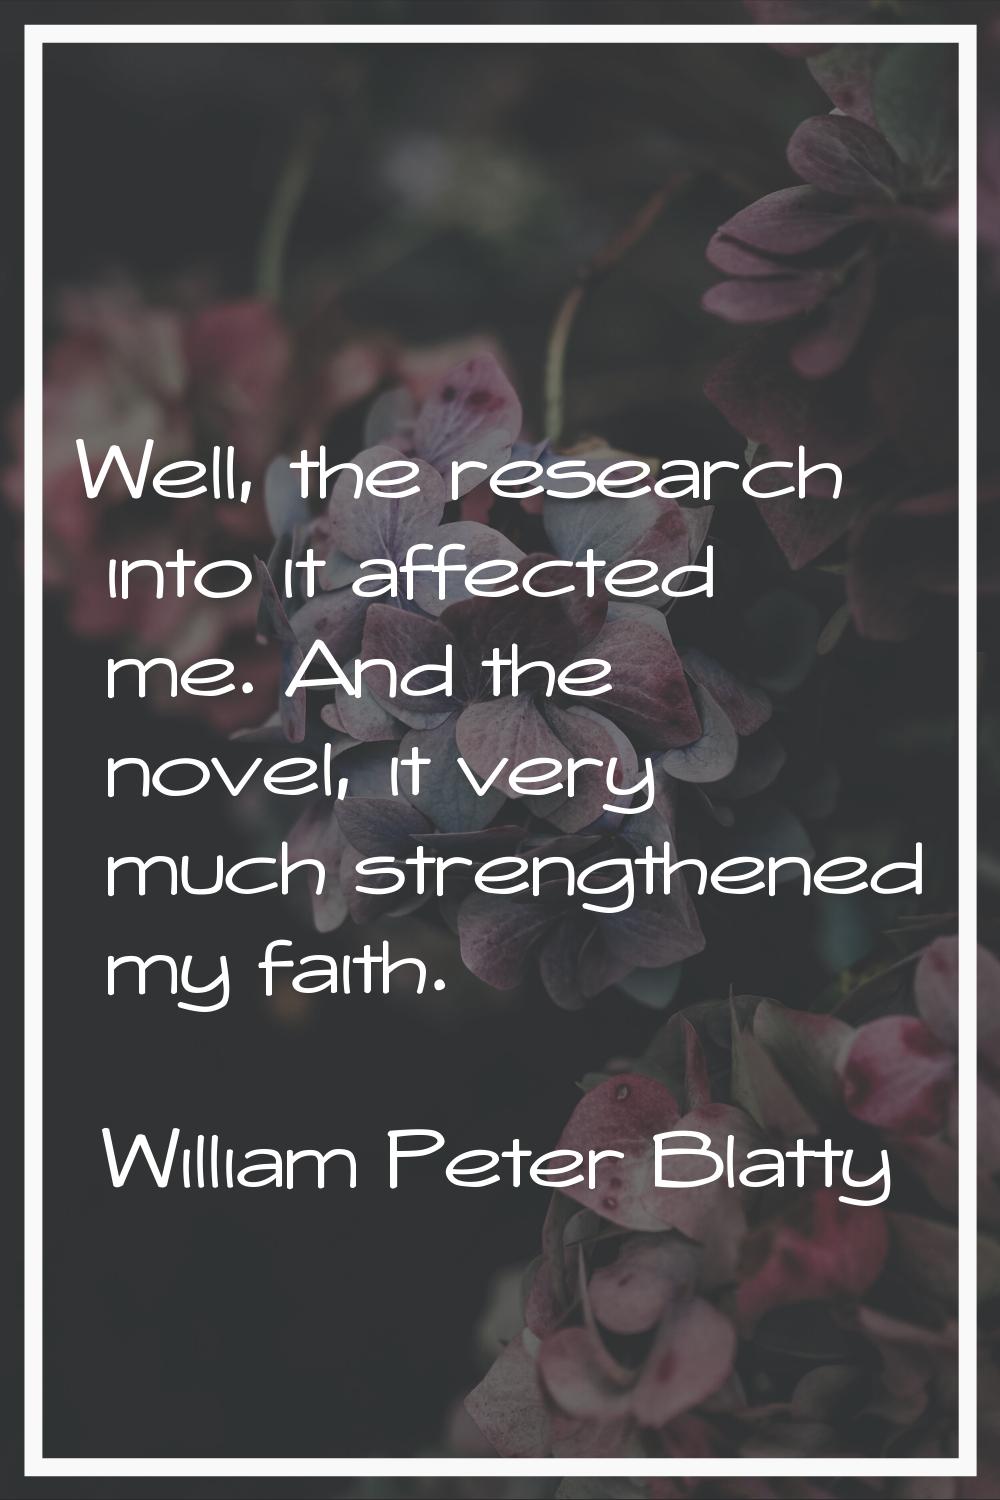 Well, the research into it affected me. And the novel, it very much strengthened my faith.